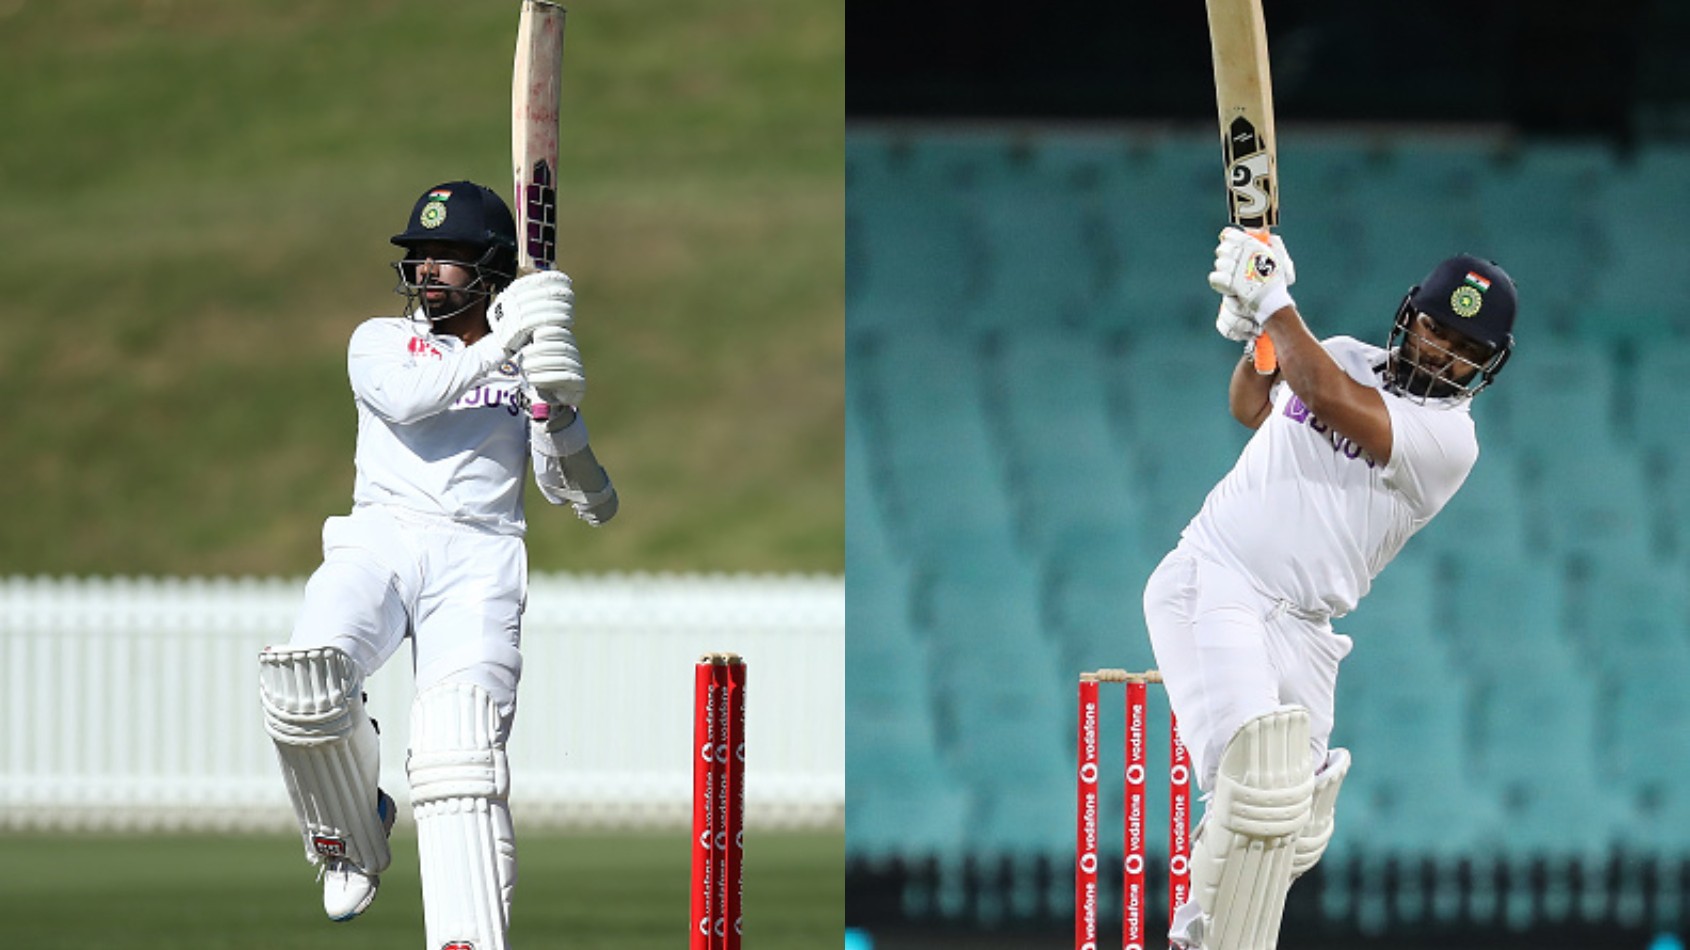 AUS v IND 2020-21: India to likely prefer Saha over Pant for the day-night Test in Adelaide, as per reports